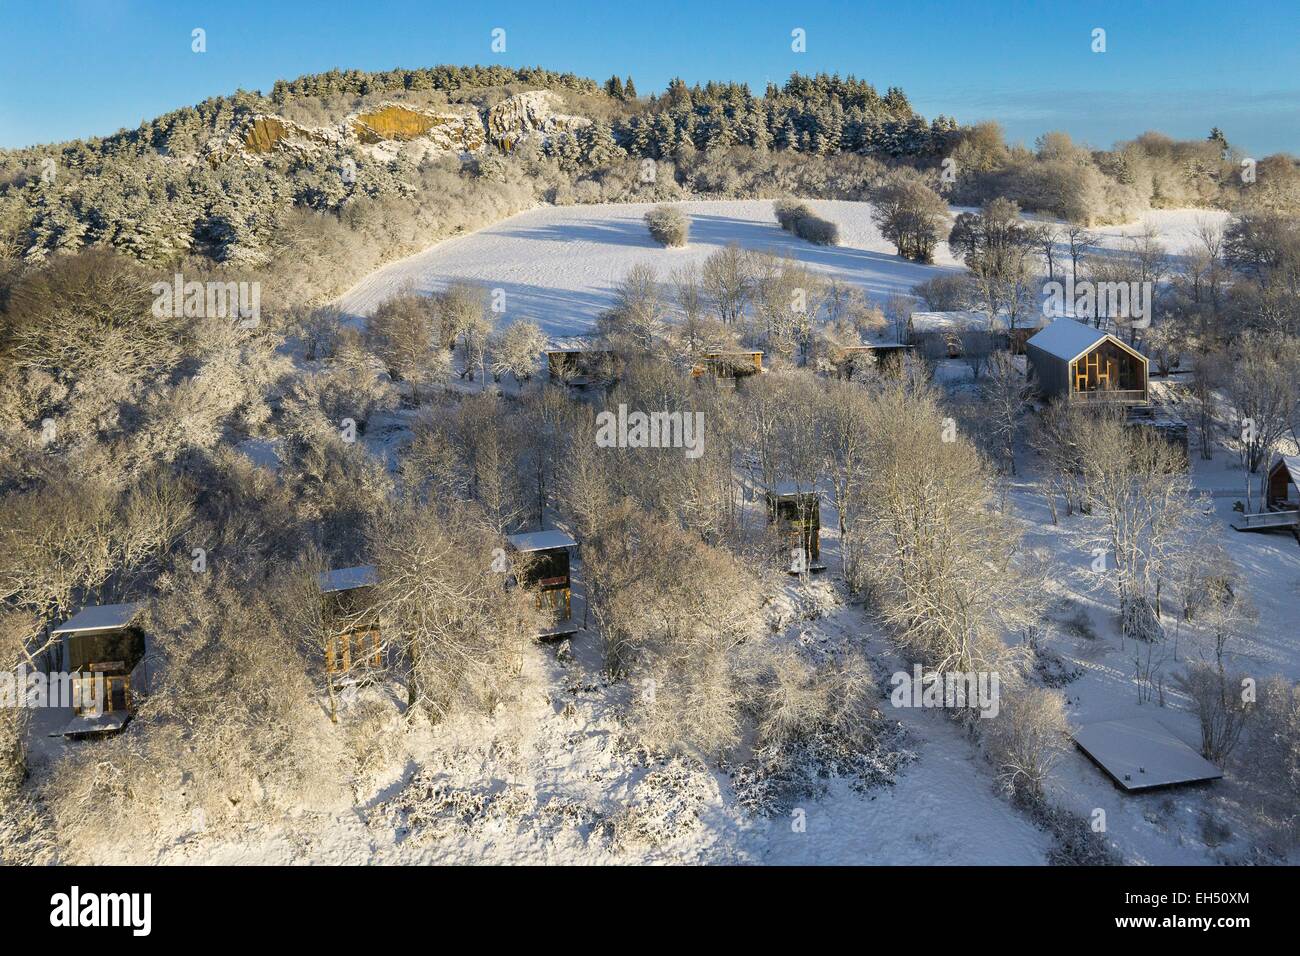 France, Puy de Dome, Manzat, Sauterre, le Bois Basalte, innovating and ecologically responsible lodging in Auvergne (aerial view) Stock Photo